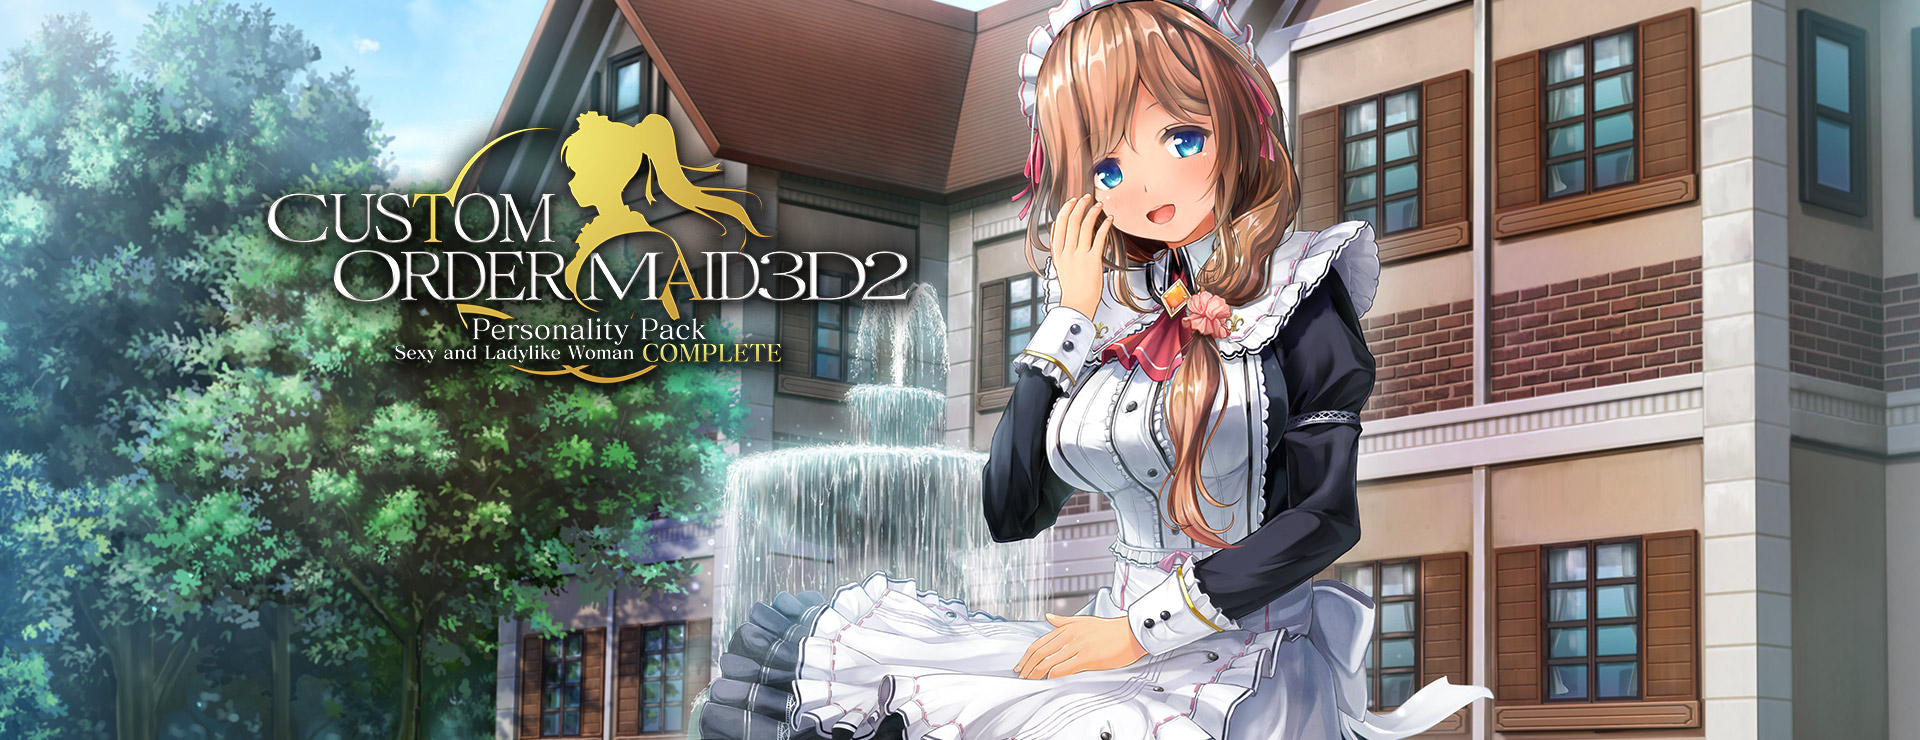 Custom Order Maid 3D 2: Sexy and Ladylike Woman Complete Bundle - Simulation Spiel